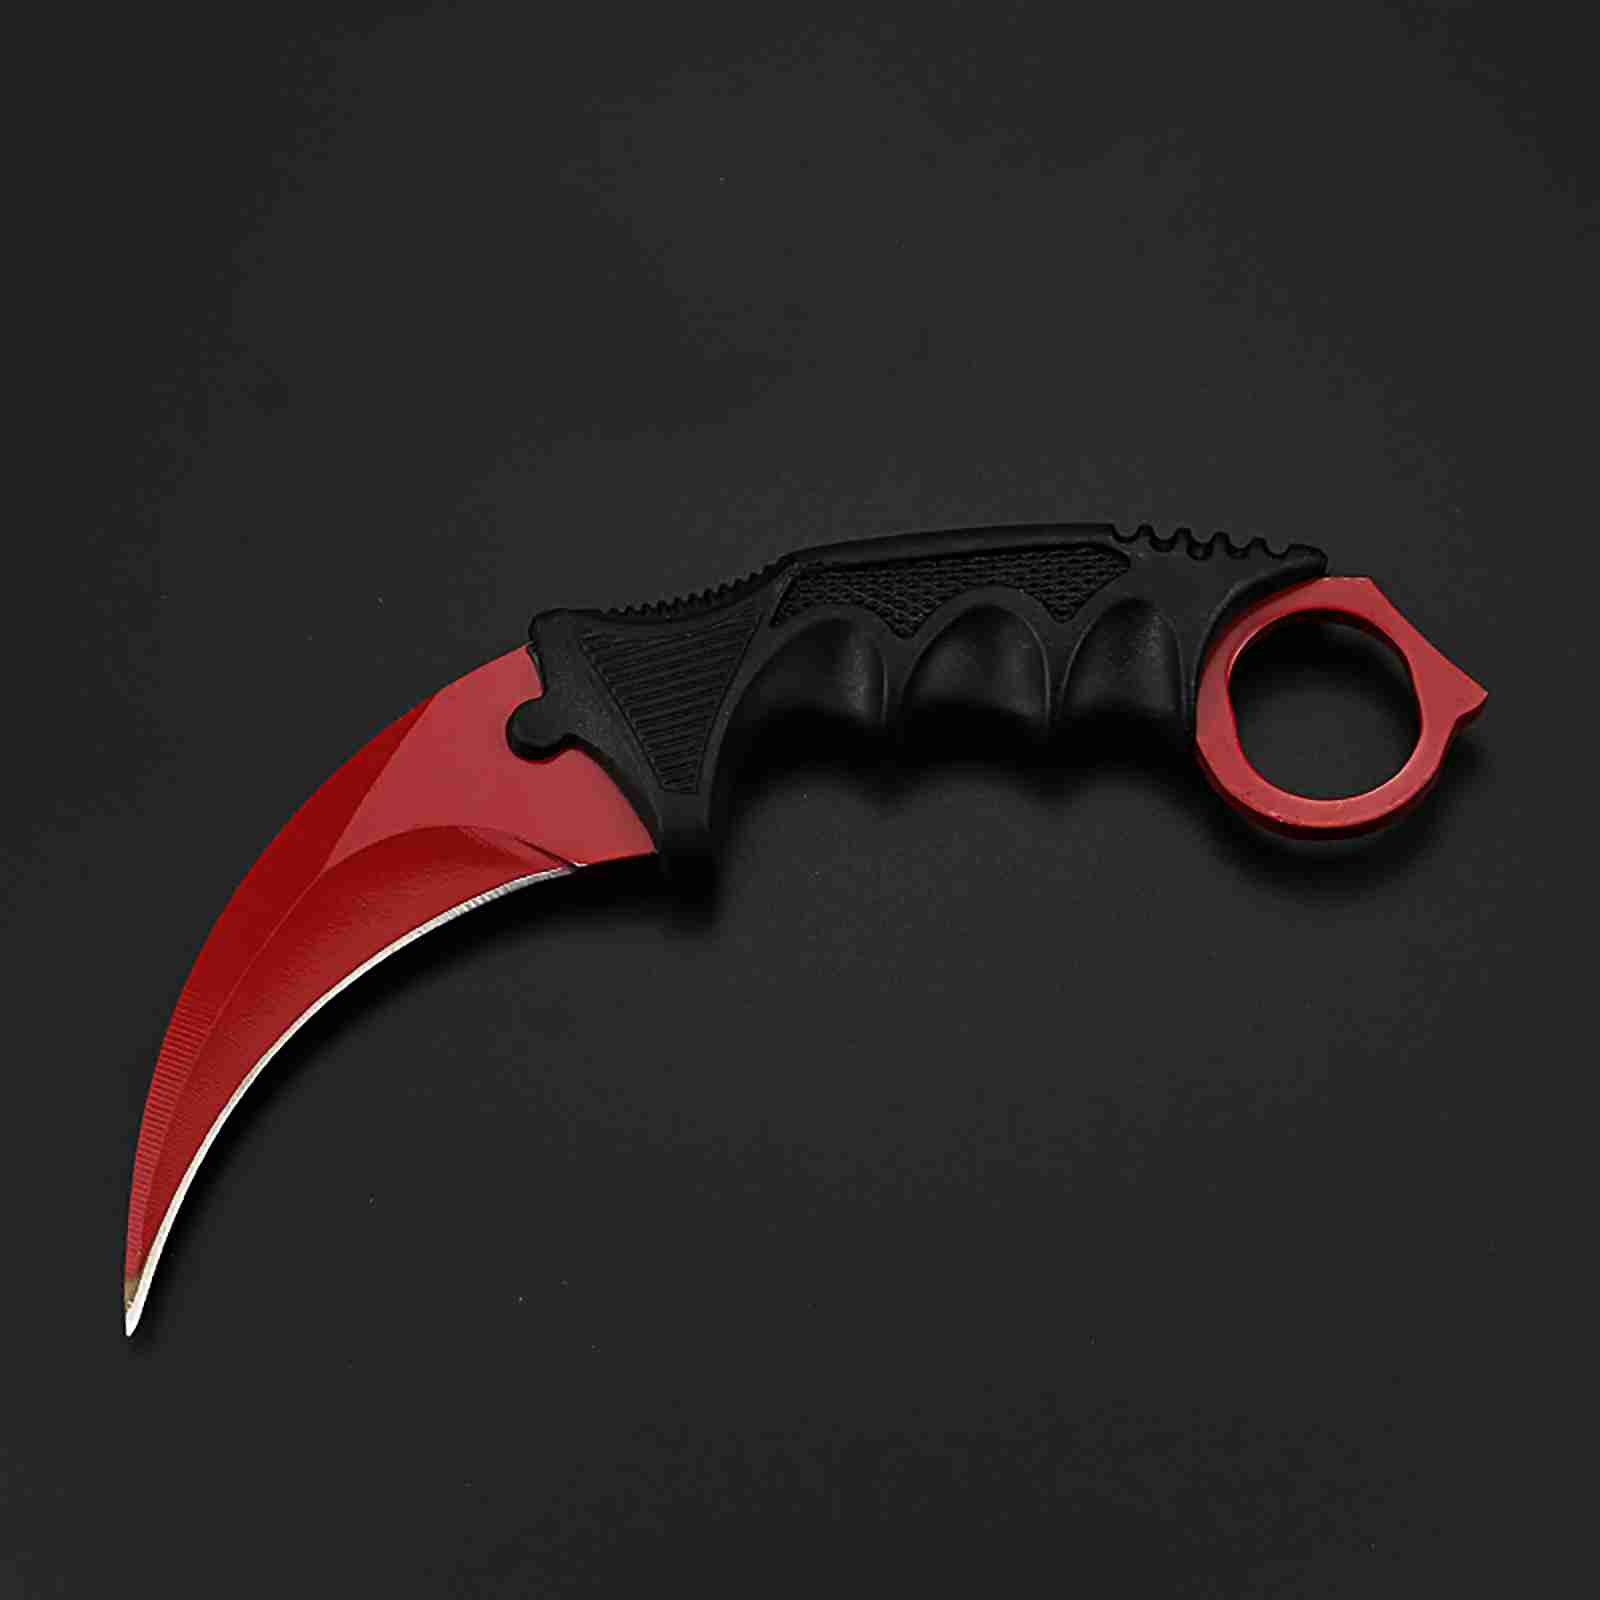 karambit-knife with discount code